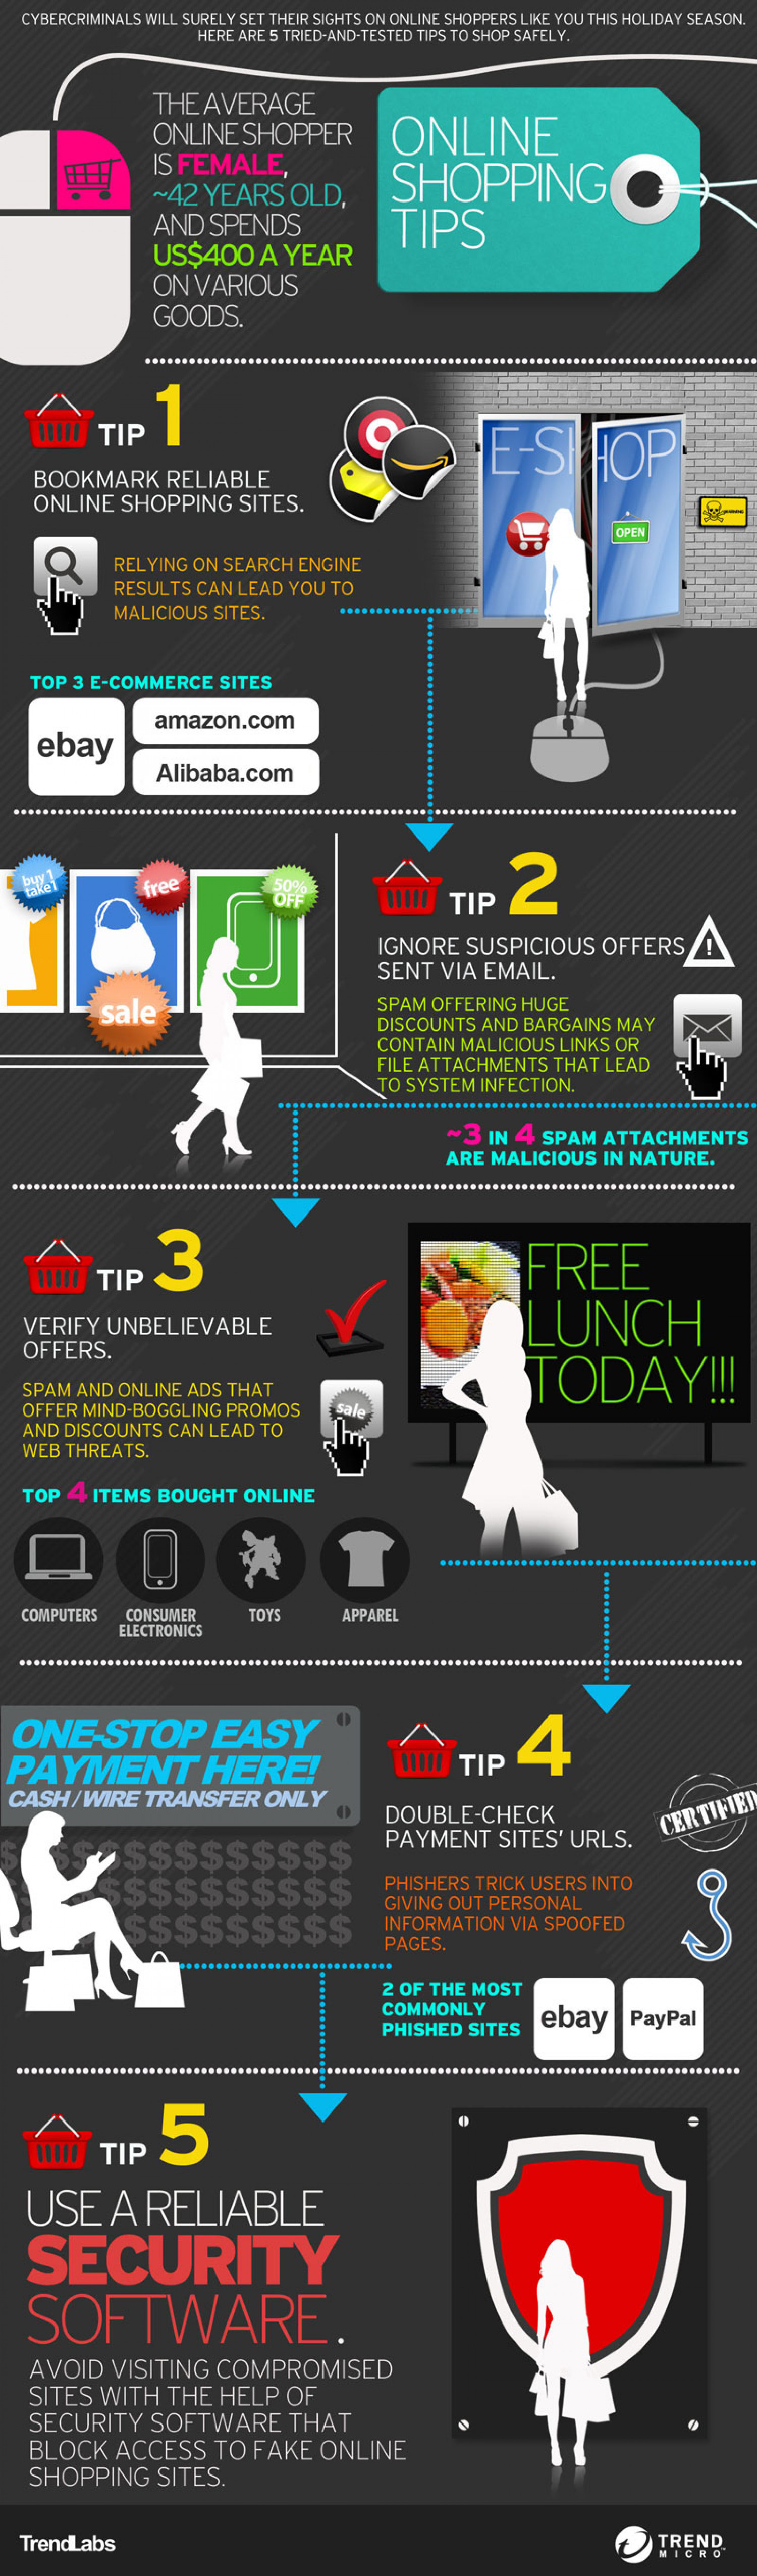 Online Shopping Safety Made Easy Infographic